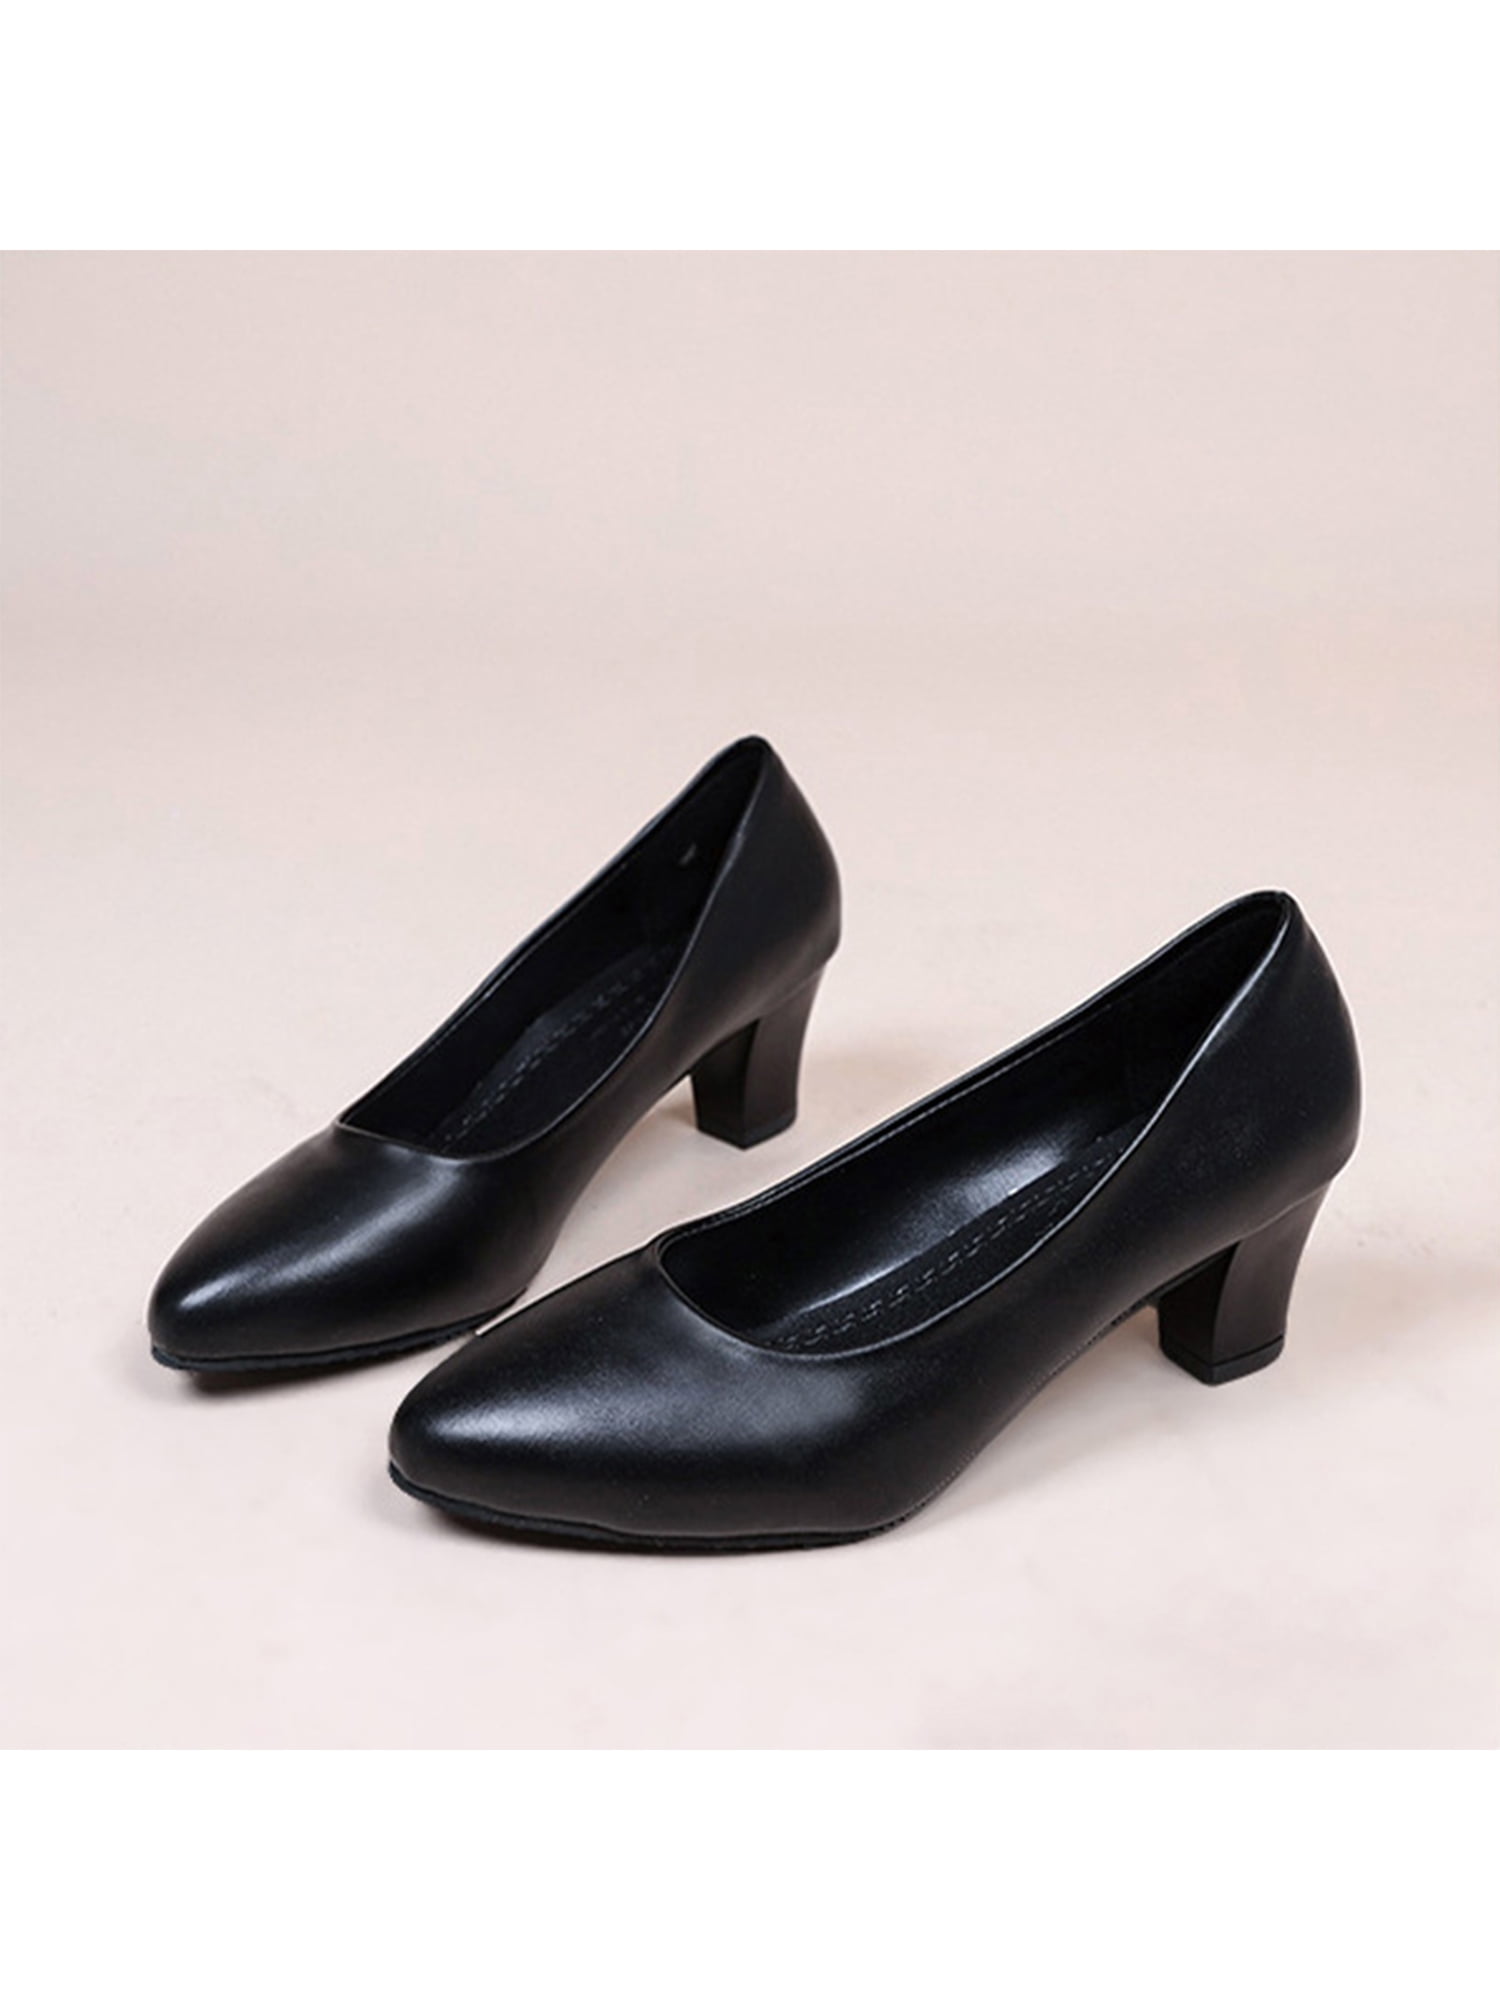 Women's Patent Leather Shoes